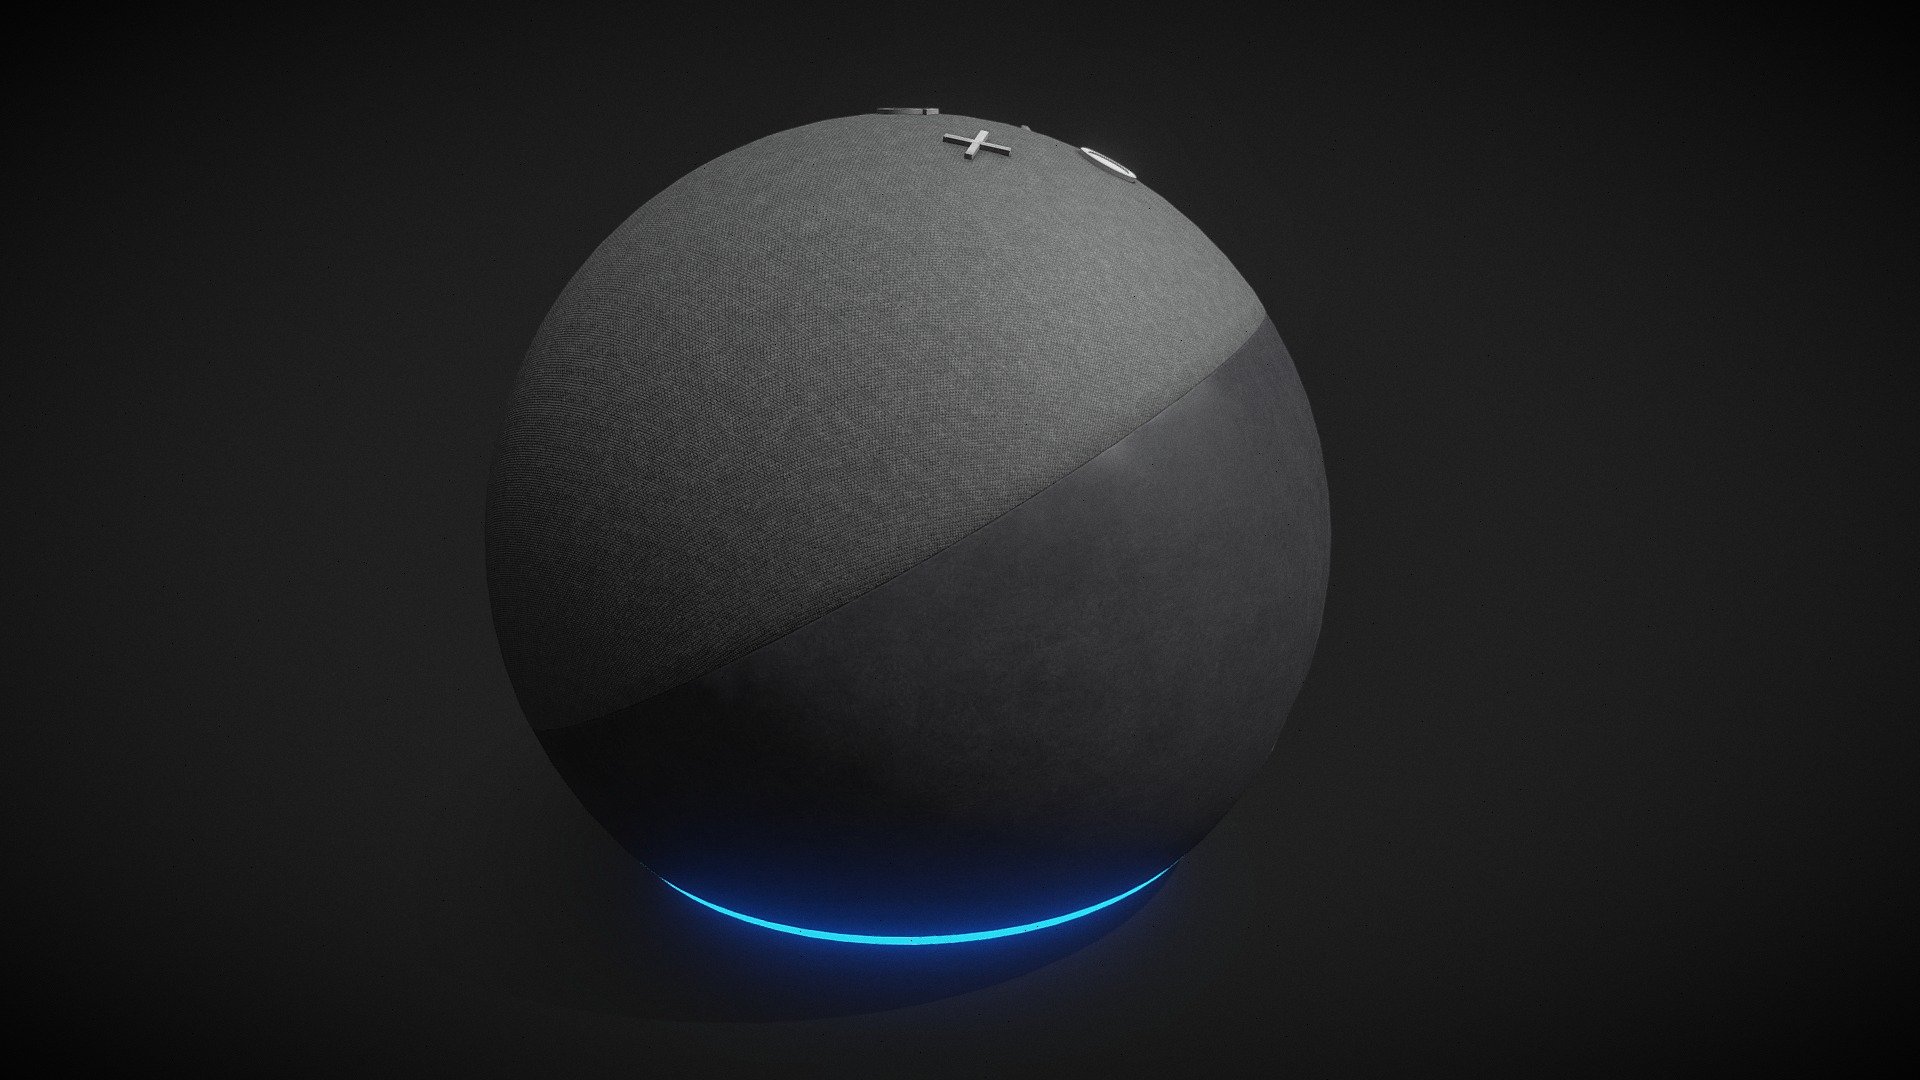 This high-quality 3D model represents the Amazon Echo Dot 4th Generation, a compact smart speaker powered by Alexa, the voice assistant developed by Amazon. The model is meticulously crafted to accurately capture the physical design.

The model is optimized for visualization purposes, with clean geometry, proper materials, and realistic texturing. It is provided in a standard file format compatible with Sketchfab and other 3D software. The textures and materials are carefully set up to ensure a realistic representation of the Echo Dot when rendered or viewed in real-time applications.

Whether you need it for product showcases, interior design visualizations, or any other creative project, this 3D model of the Amazon Echo Dot 4th Generation will help bring your ideas to life with accuracy and detail.

Note: Please remember to respect intellectual property rights and ensure you have the necessary permissio ns to use and distribute any 3D models or designs based on copyrighted products like the Amazon Echo Dot 3d model